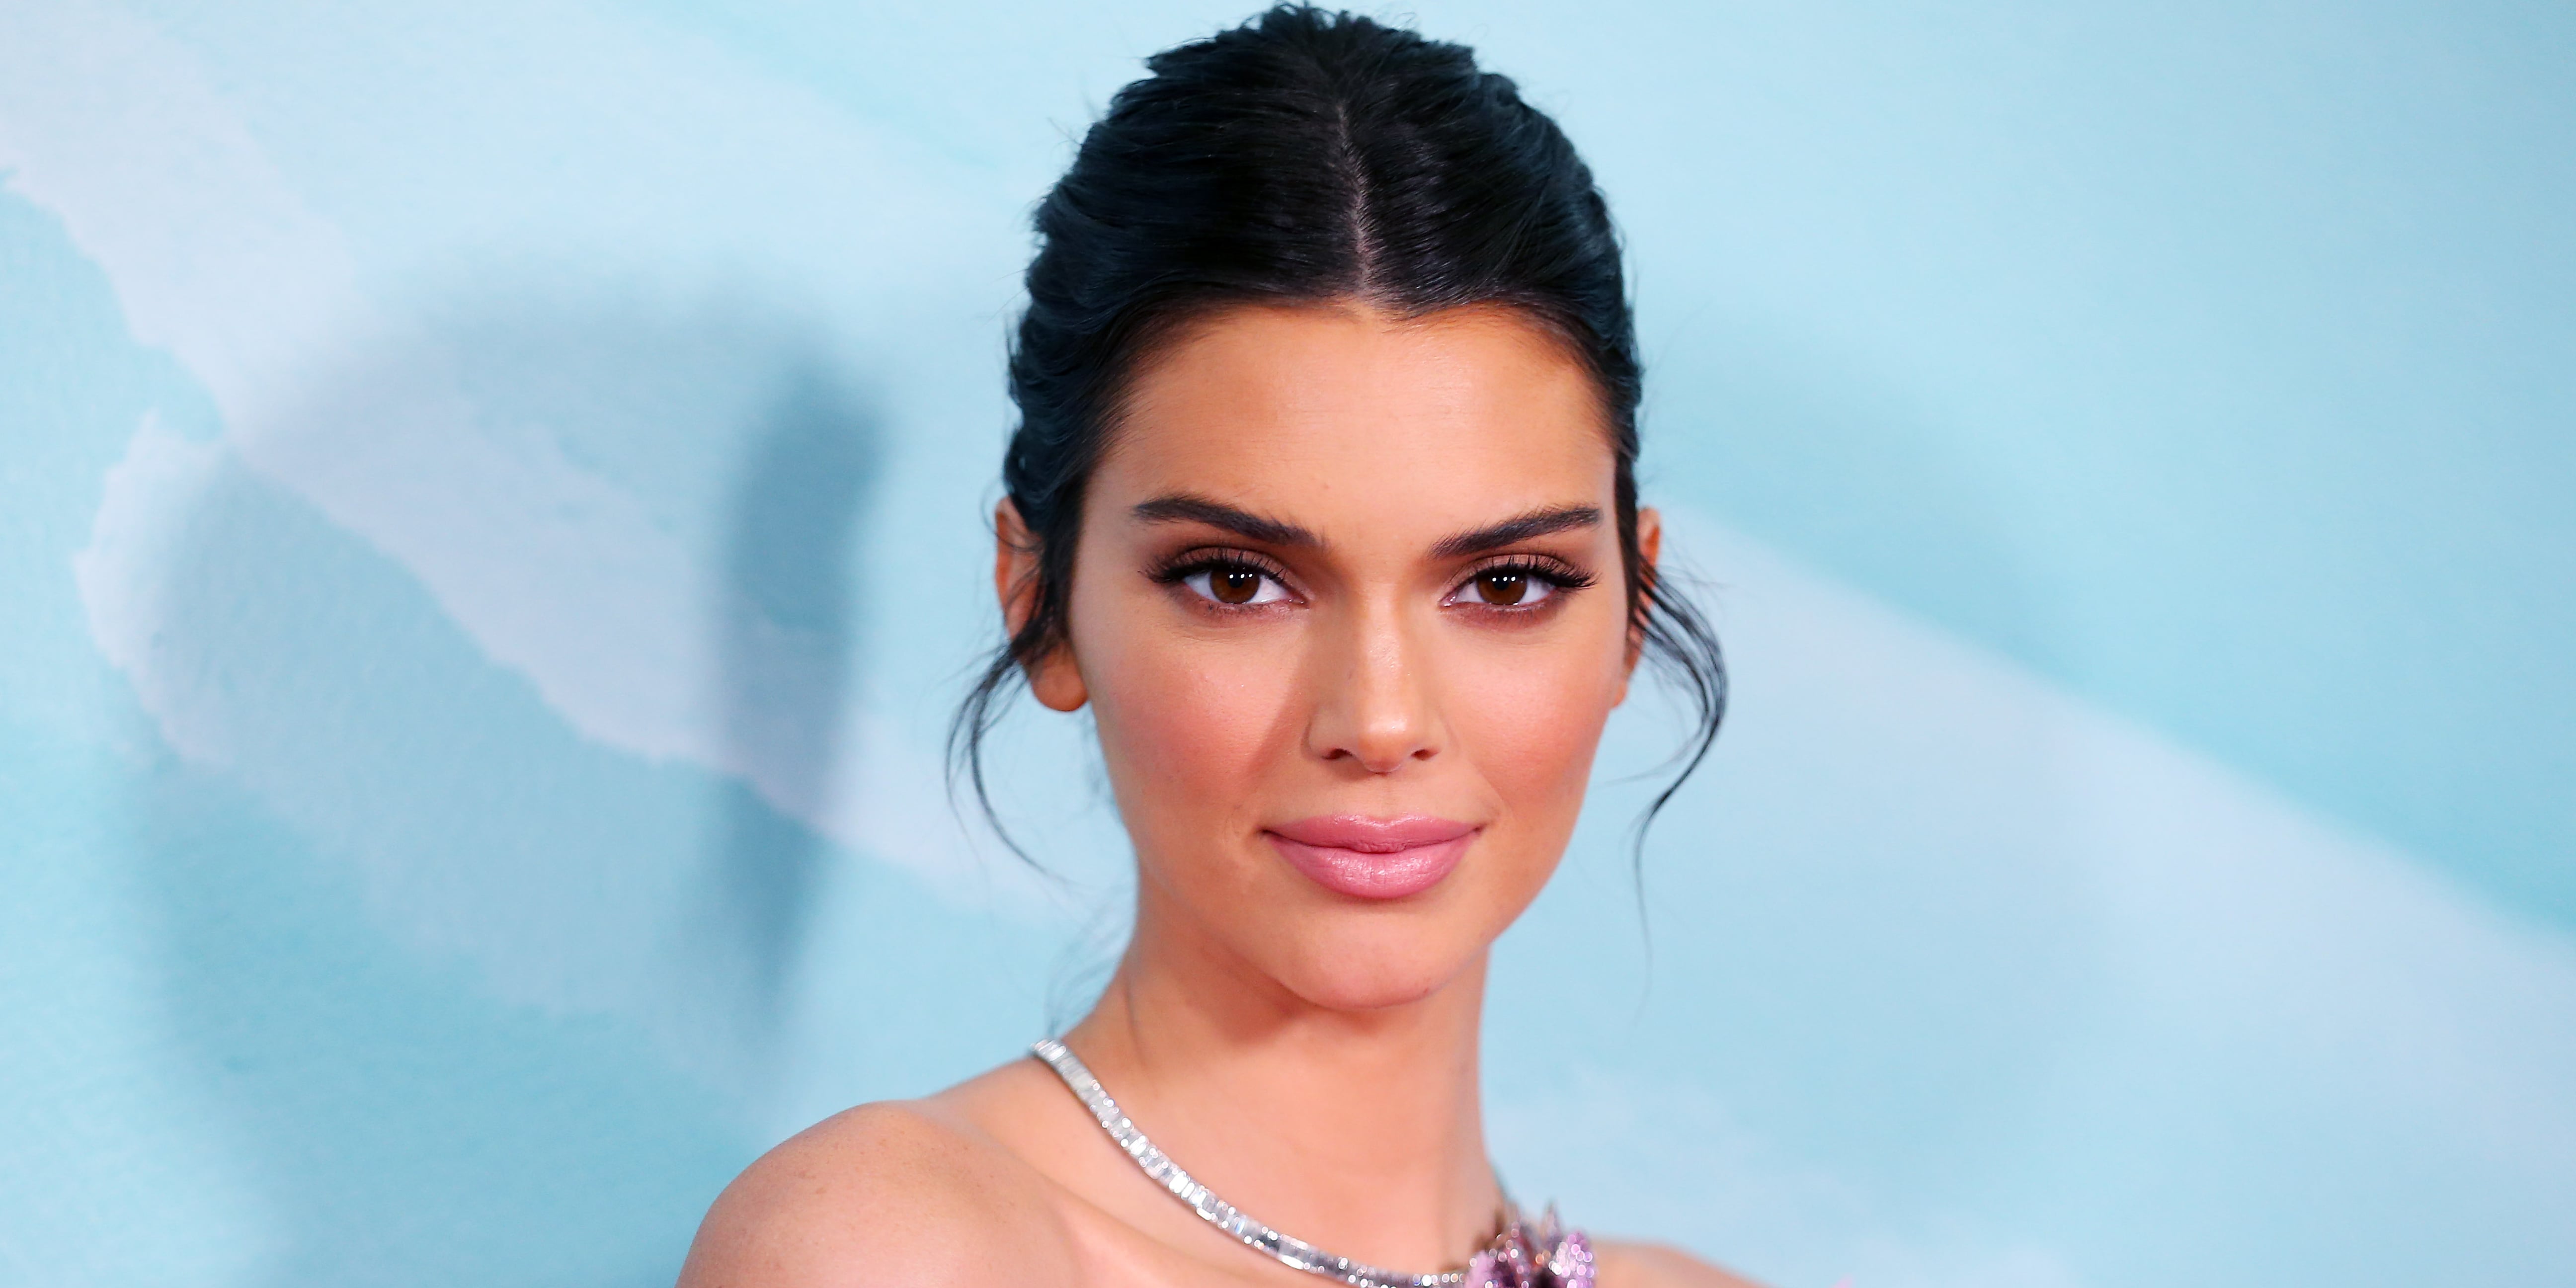 Kendall Jenner's Dating History: From Harry Styles to Bad Bunny